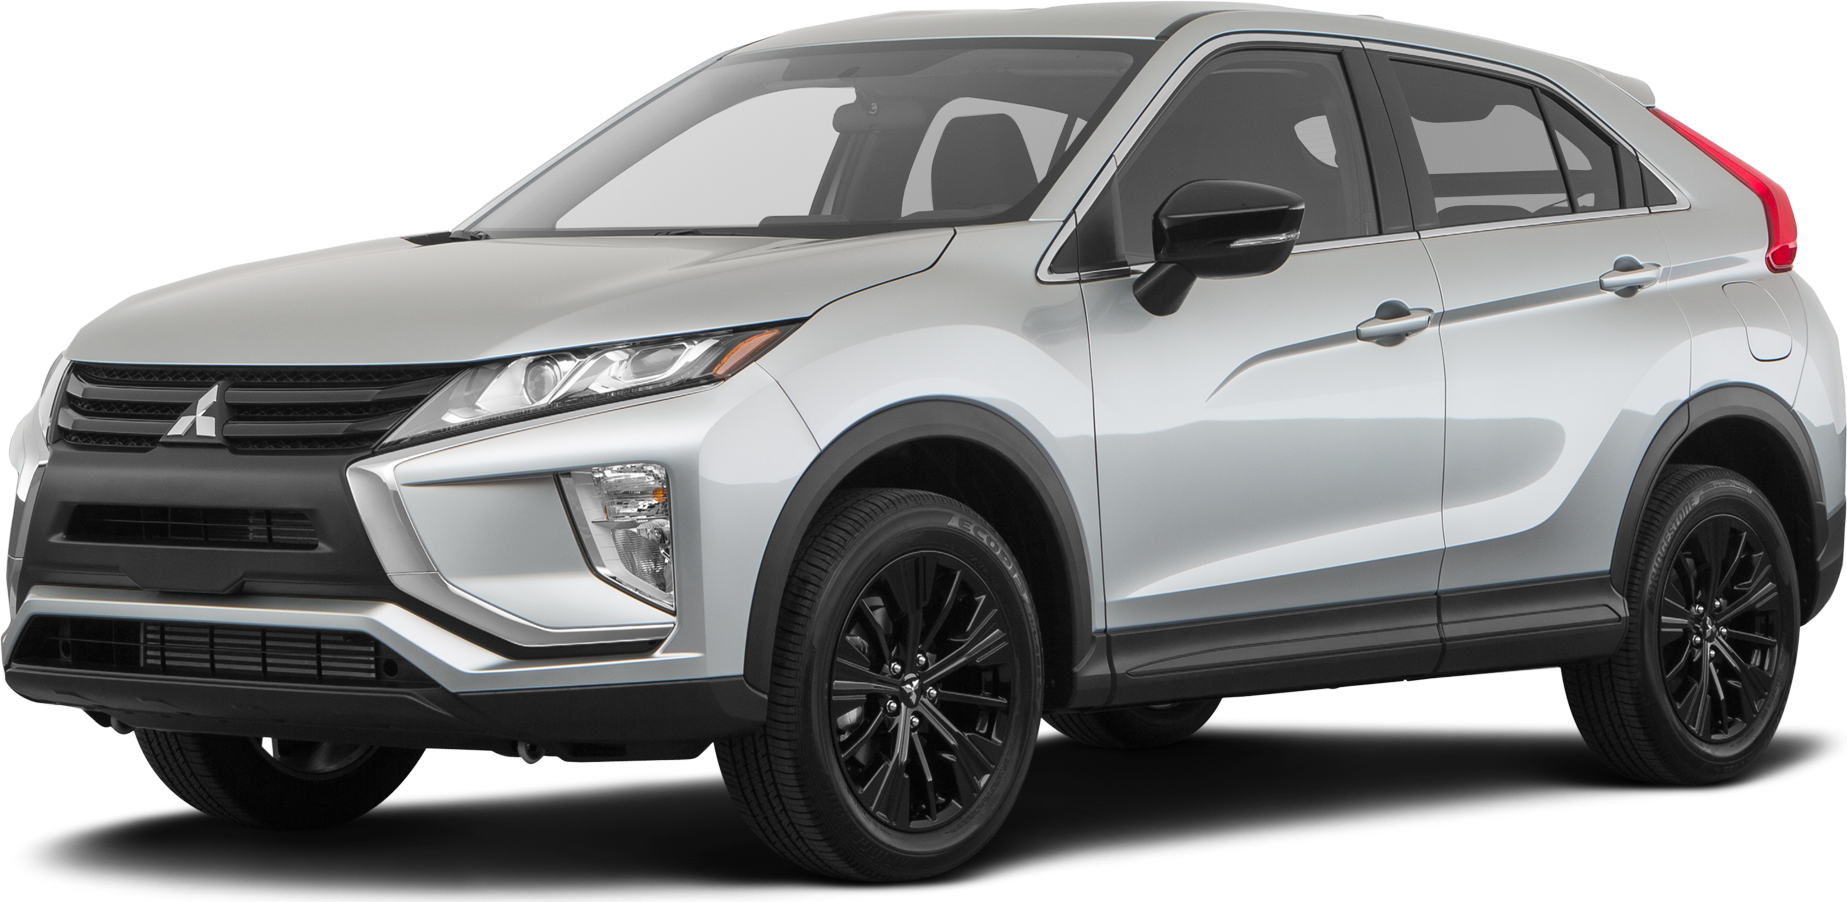 2018 Mitsubishi Eclipse Cross Price, Value, Ratings & Reviews